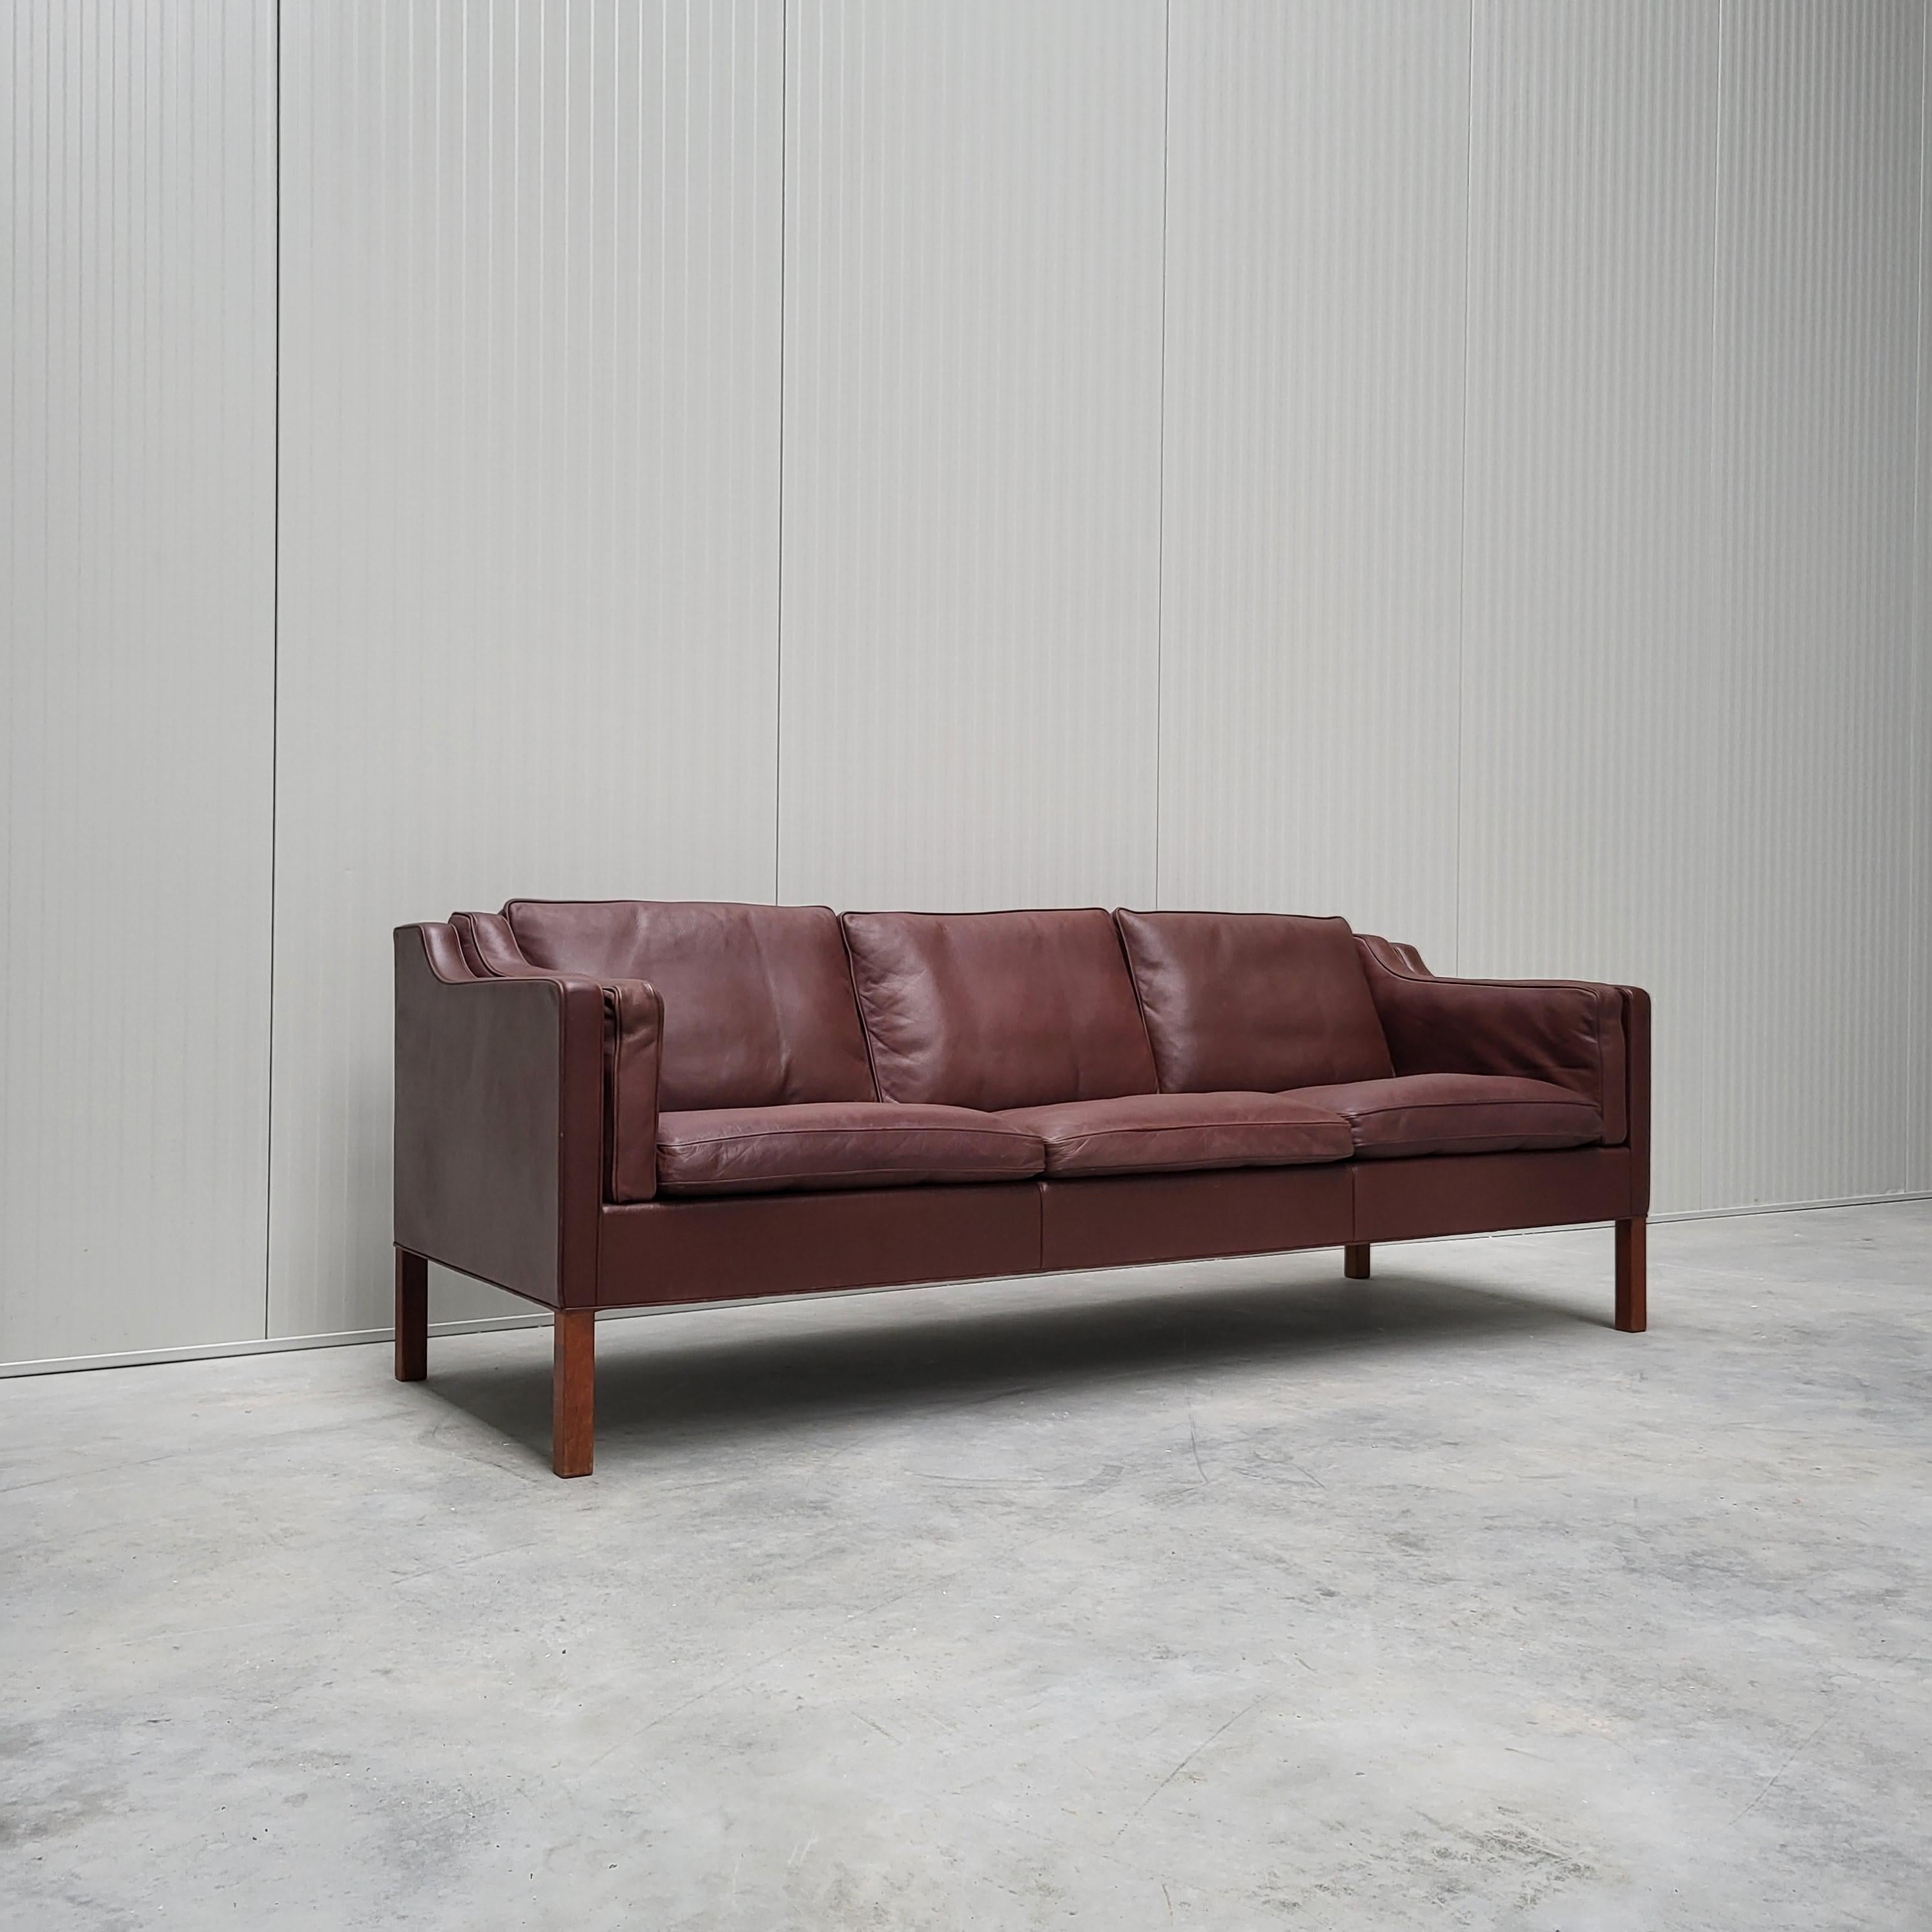 Amazing 3-seater sofa mod. BM2213 designed by Børge Mogensen and produced by Fredericia Stolefabrik in Denmark, 1962.

The sofa comes in a great original condition with a wonderful brown leather upholstery at its best.
Highest quality standard by